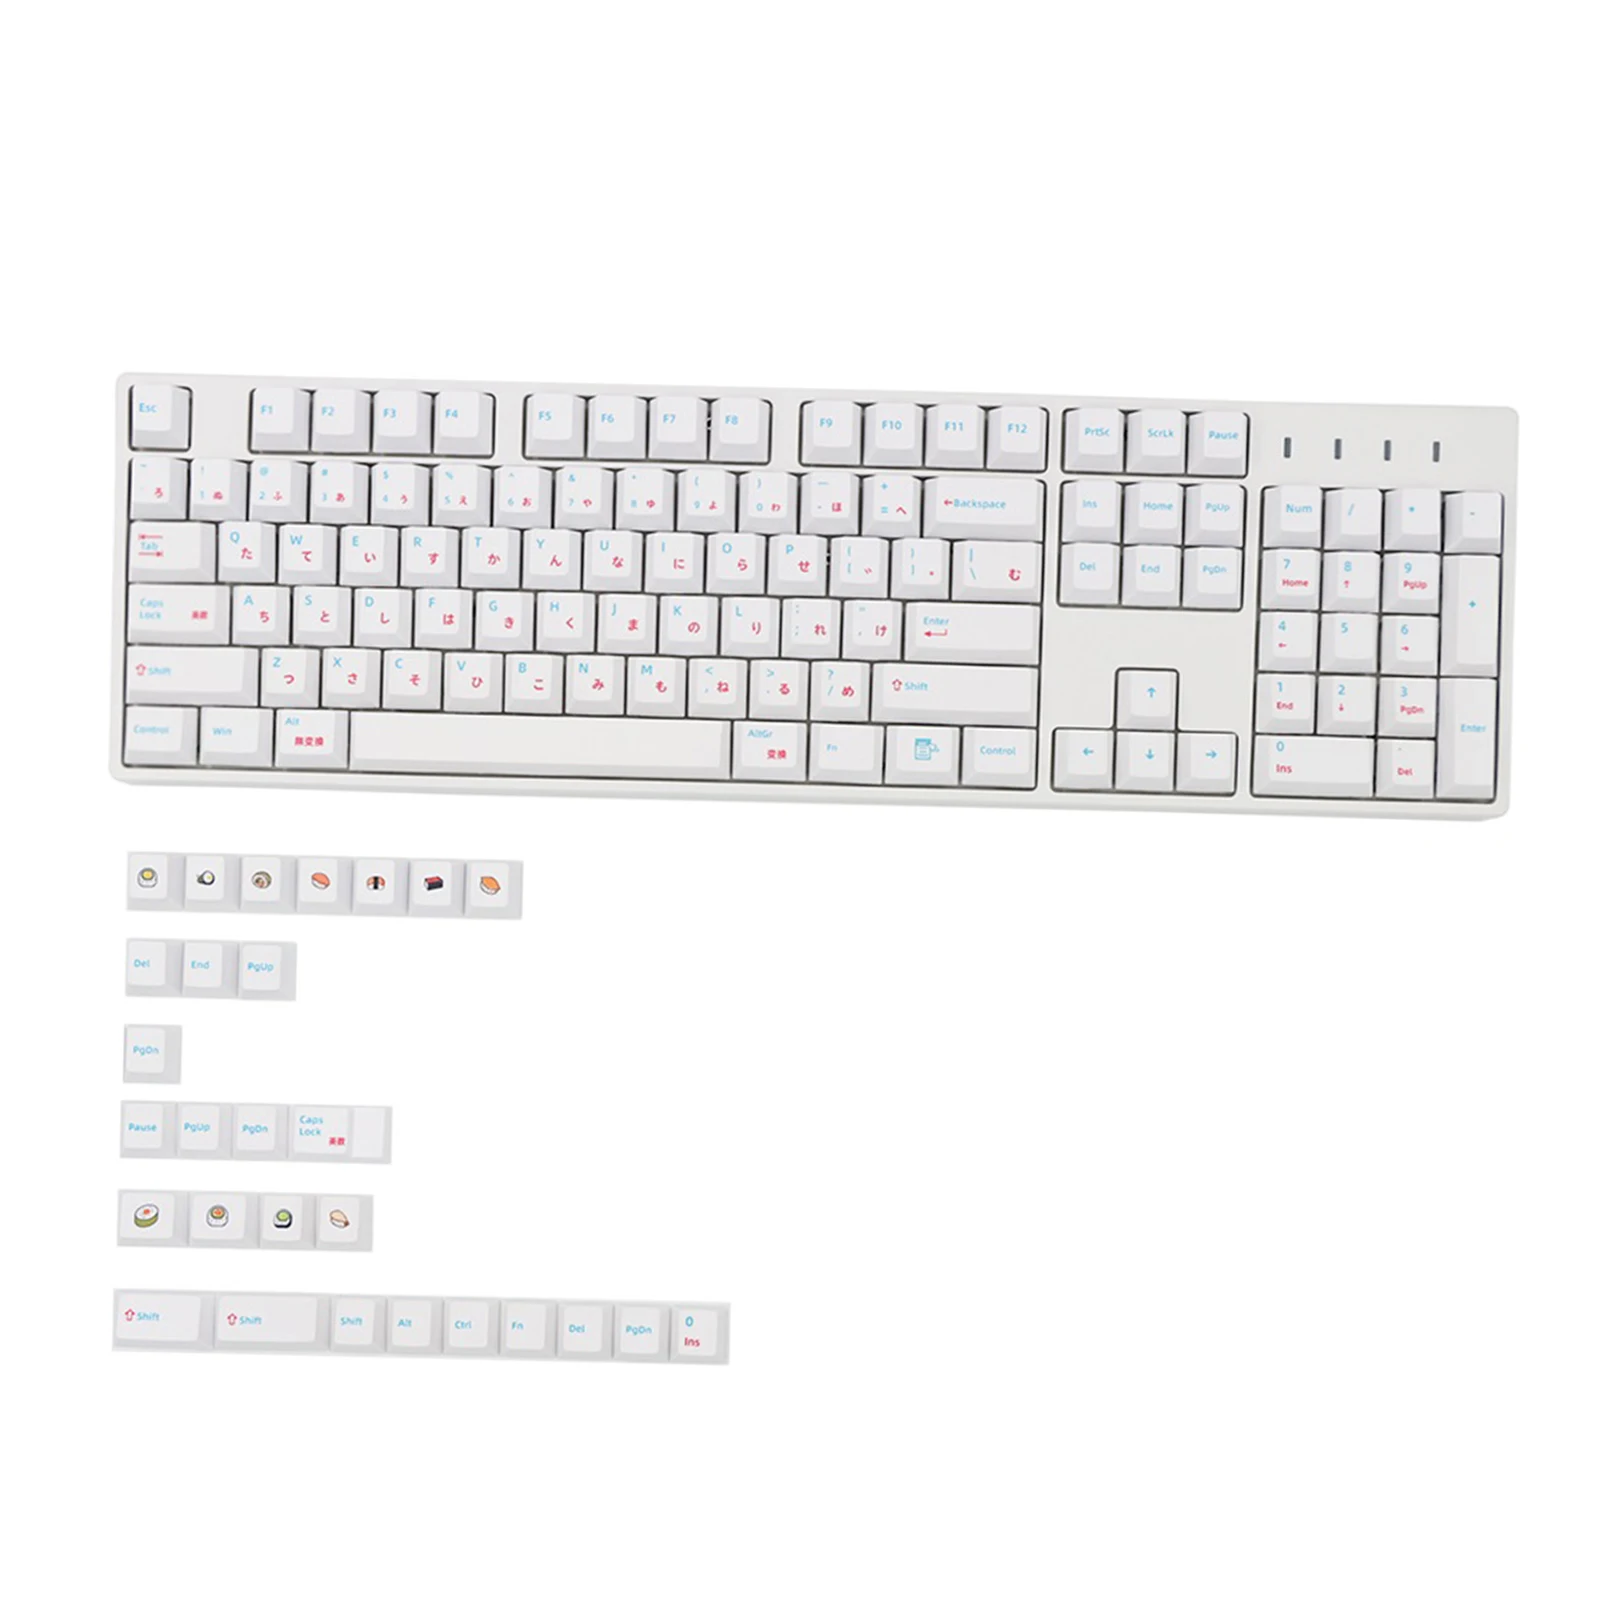 135 Keys Japanese PBT Keycaps Replacement Set Keyboard Accessory Suitable for Cherry MX Mechanical Gaming Keyboard Accessories